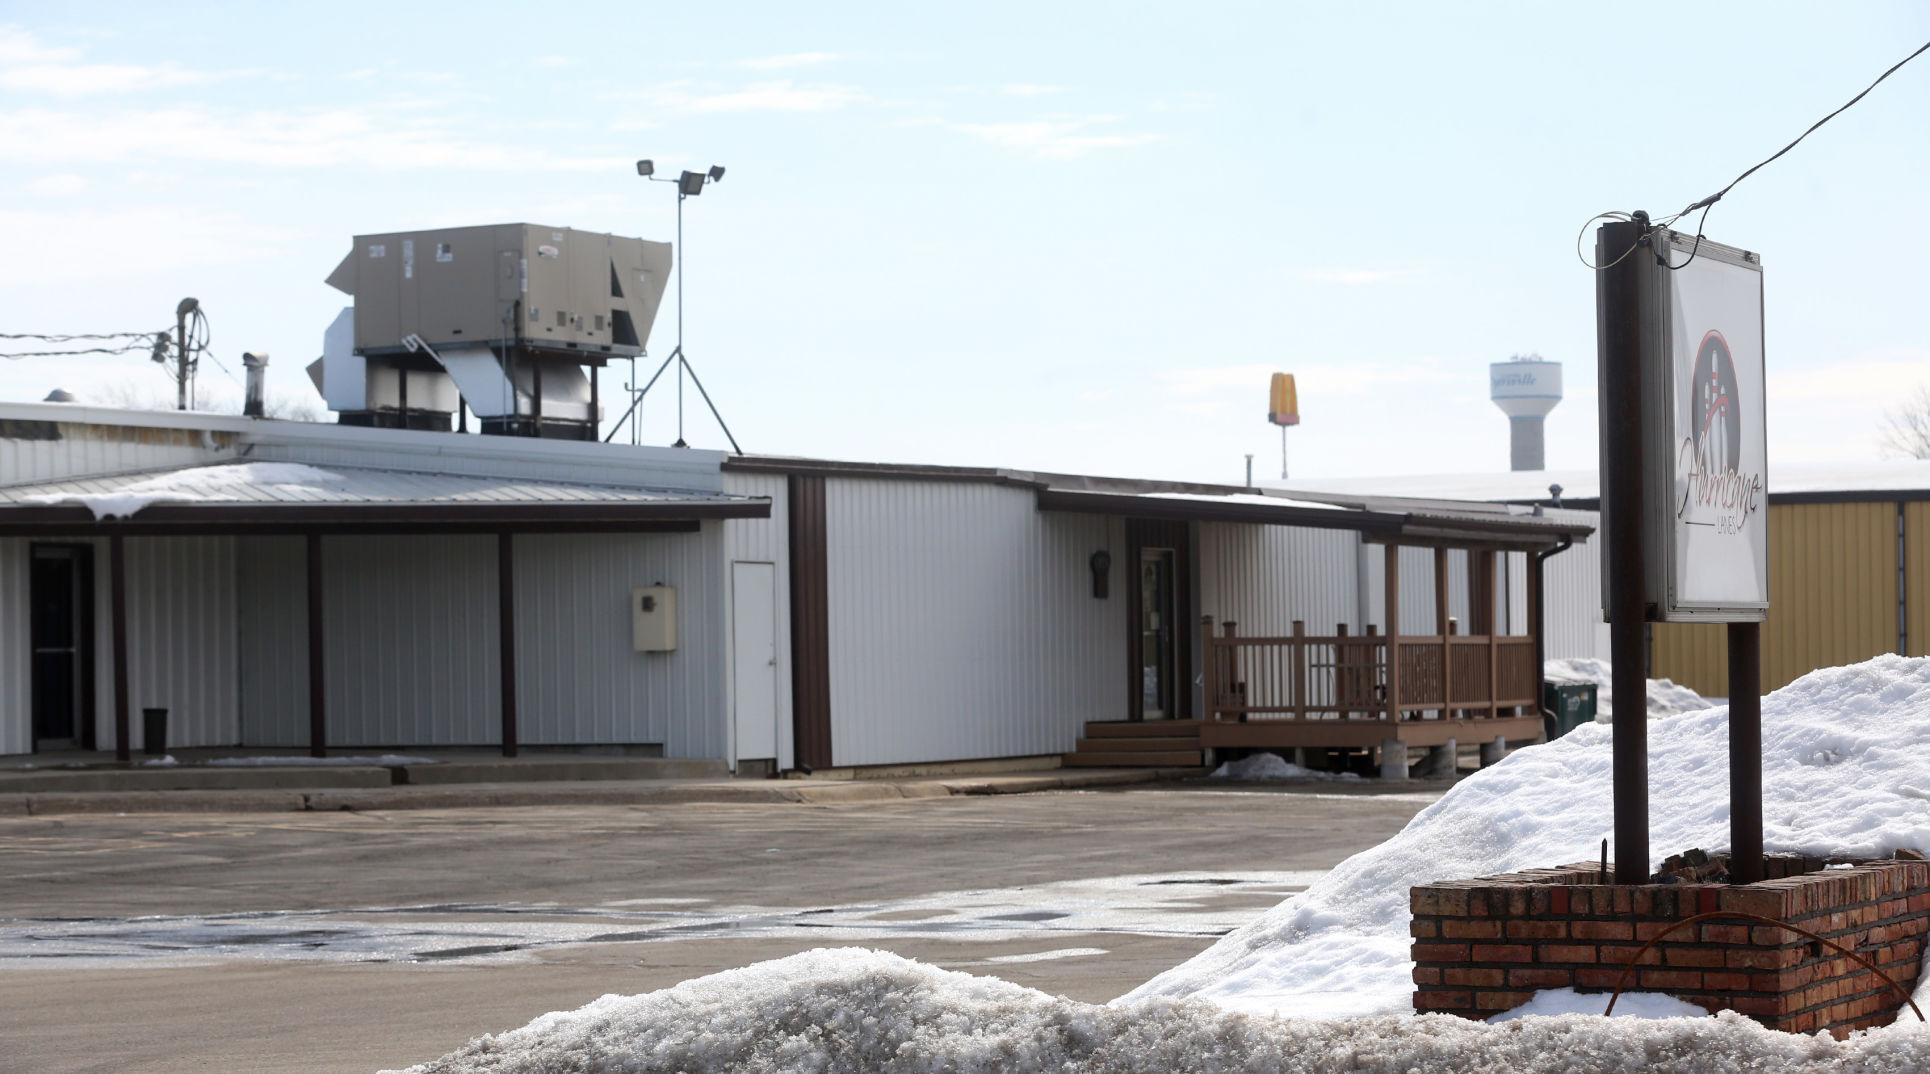 Dyersville Economic Development Corp. has invested thousands of dollars into revamping the building housing Hurricane Lanes Bowling Center and the former Royal Supper Club at 703 13th Ave. SE in Dyersville, Iowa. PHOTO CREDIT: JESSICA REILLY